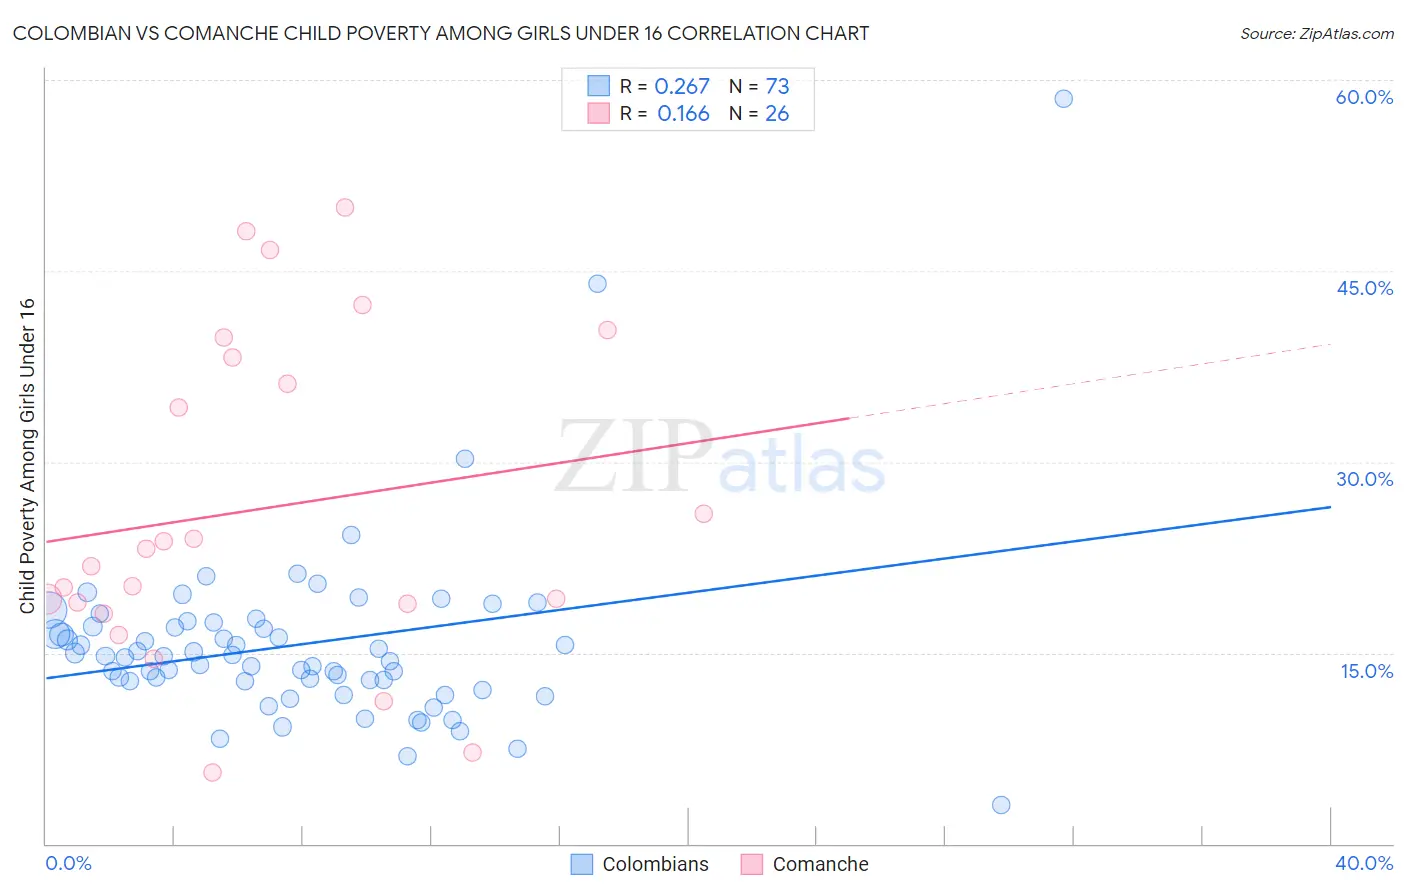 Colombian vs Comanche Child Poverty Among Girls Under 16